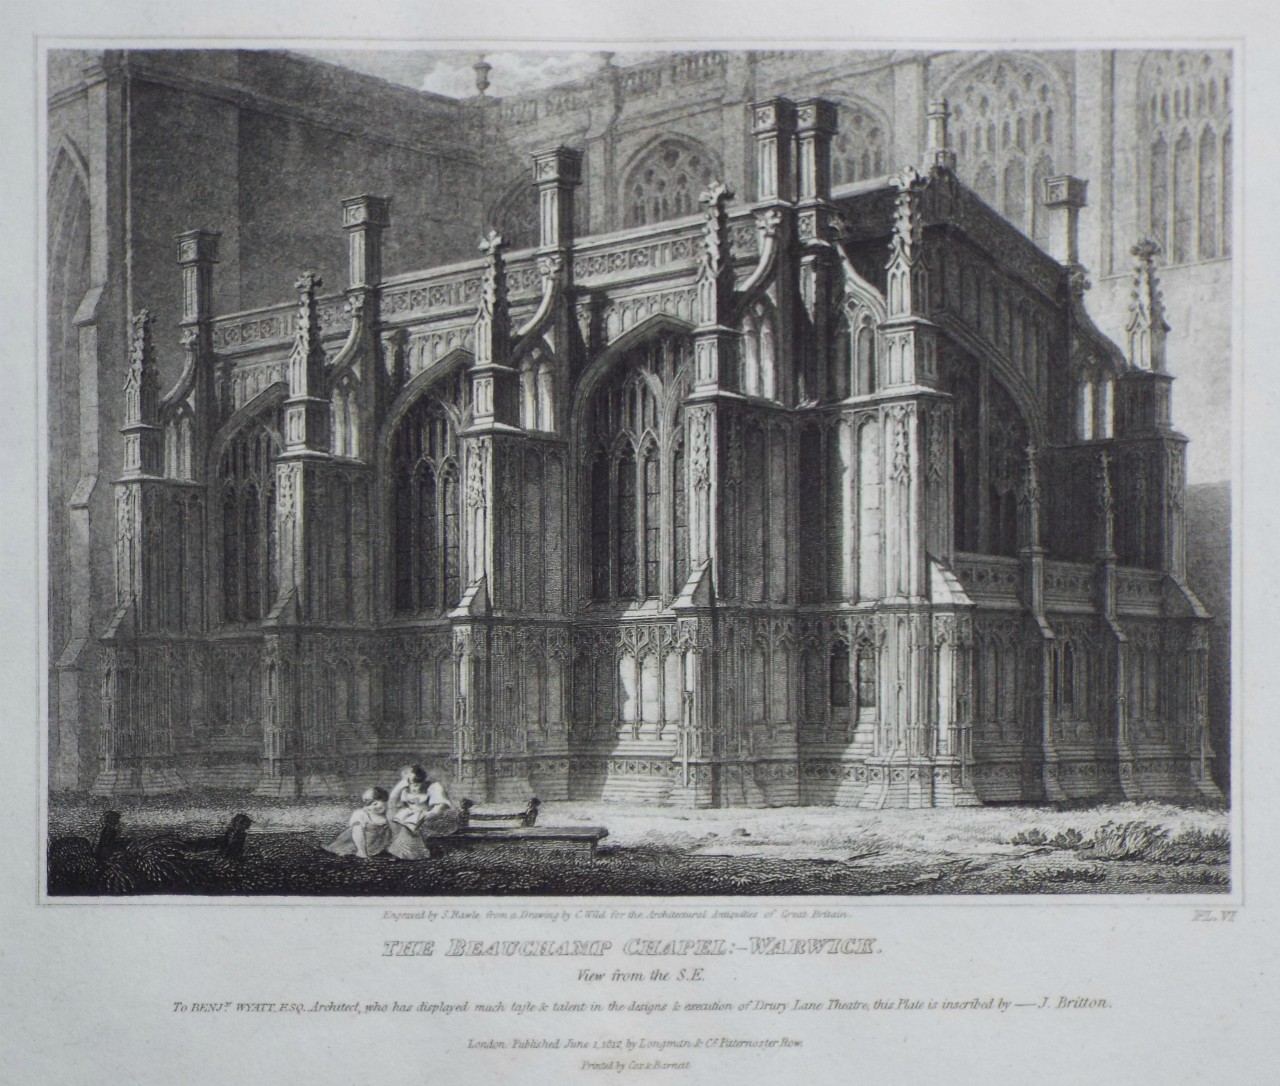 Print - The Beauchamp Chapel: - Warwick. View from the S. E. - Rawl